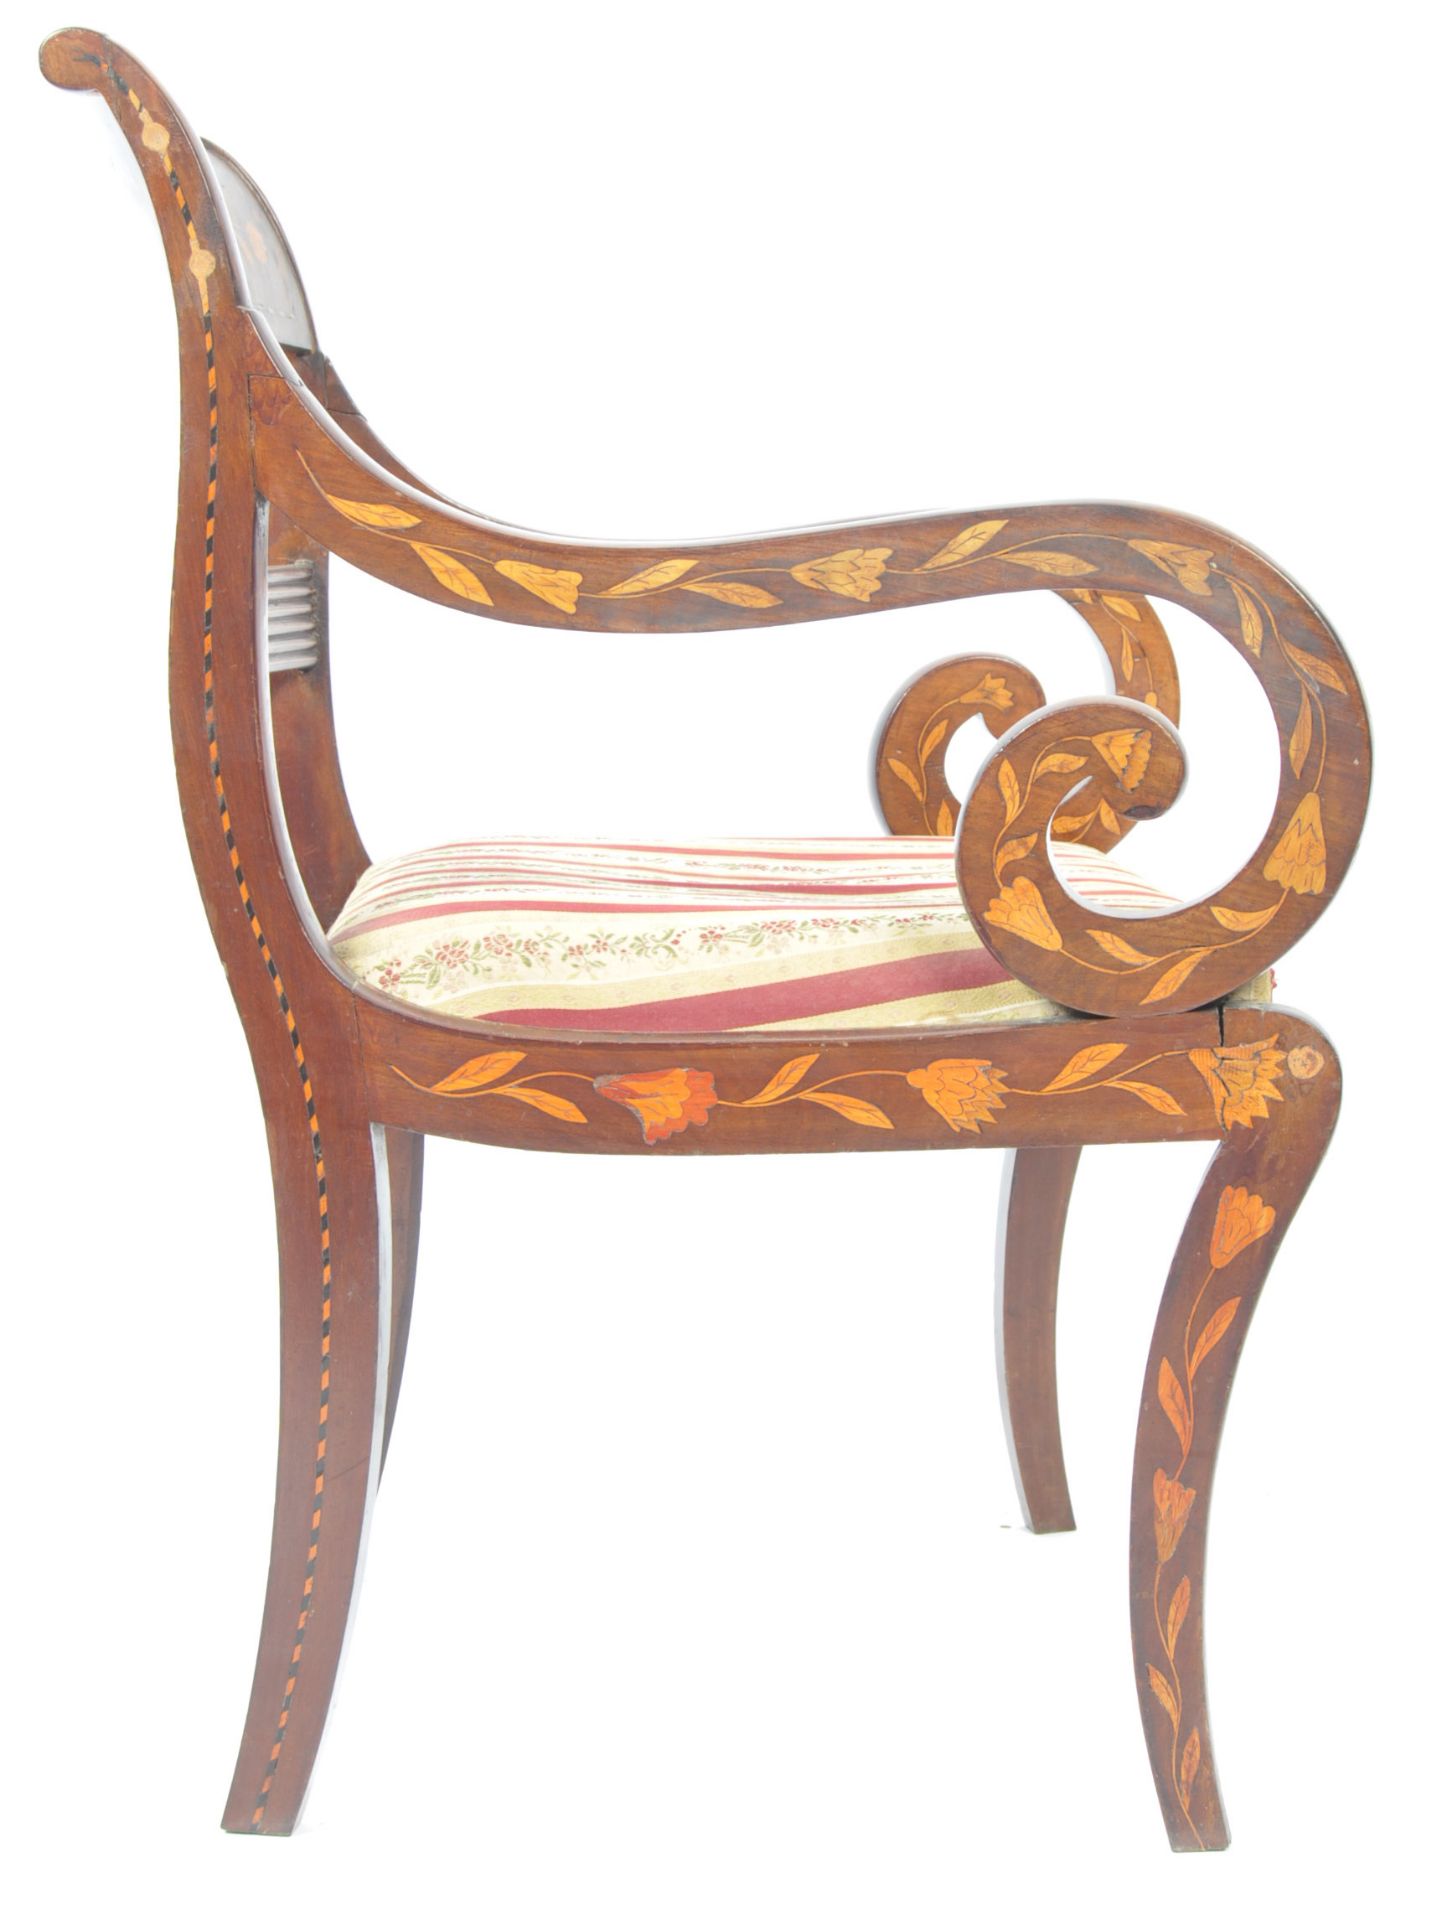 19TH CENTURY DUTCH FLORAL MARQUETRY ARM CHAIR - Image 4 of 15